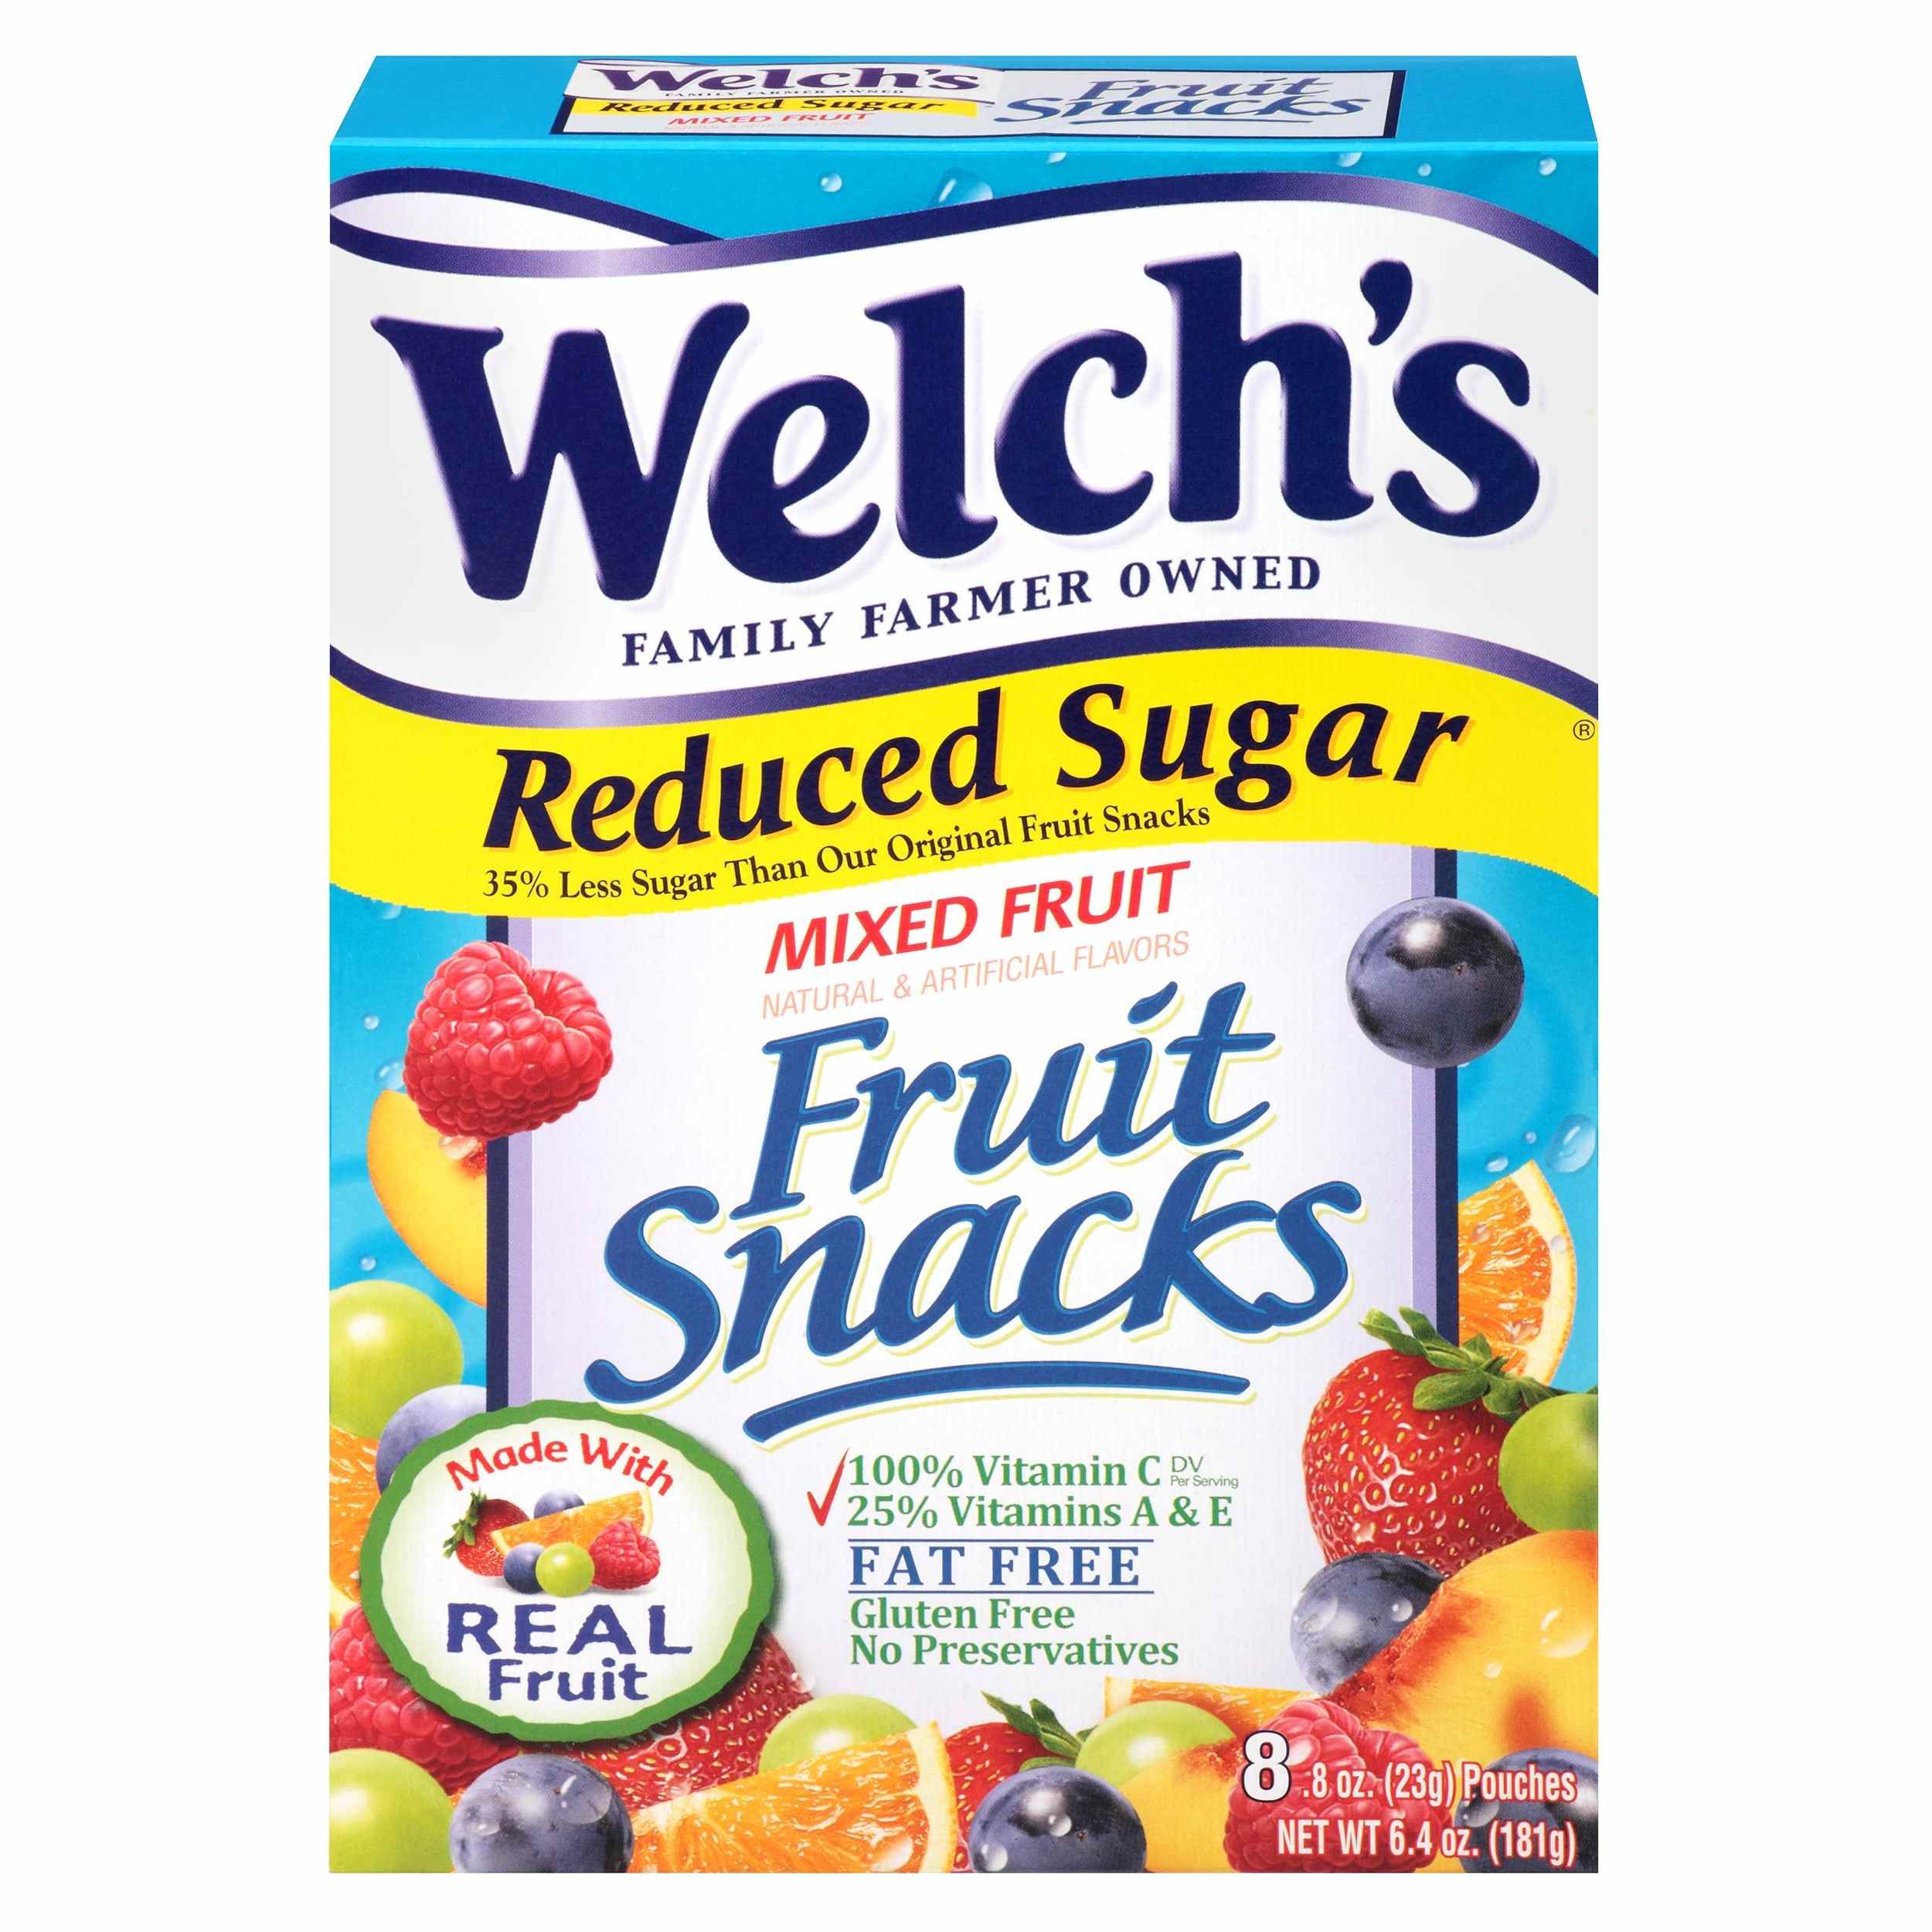 Welch's reduced sugar fruit snacks may be improperly packaged.